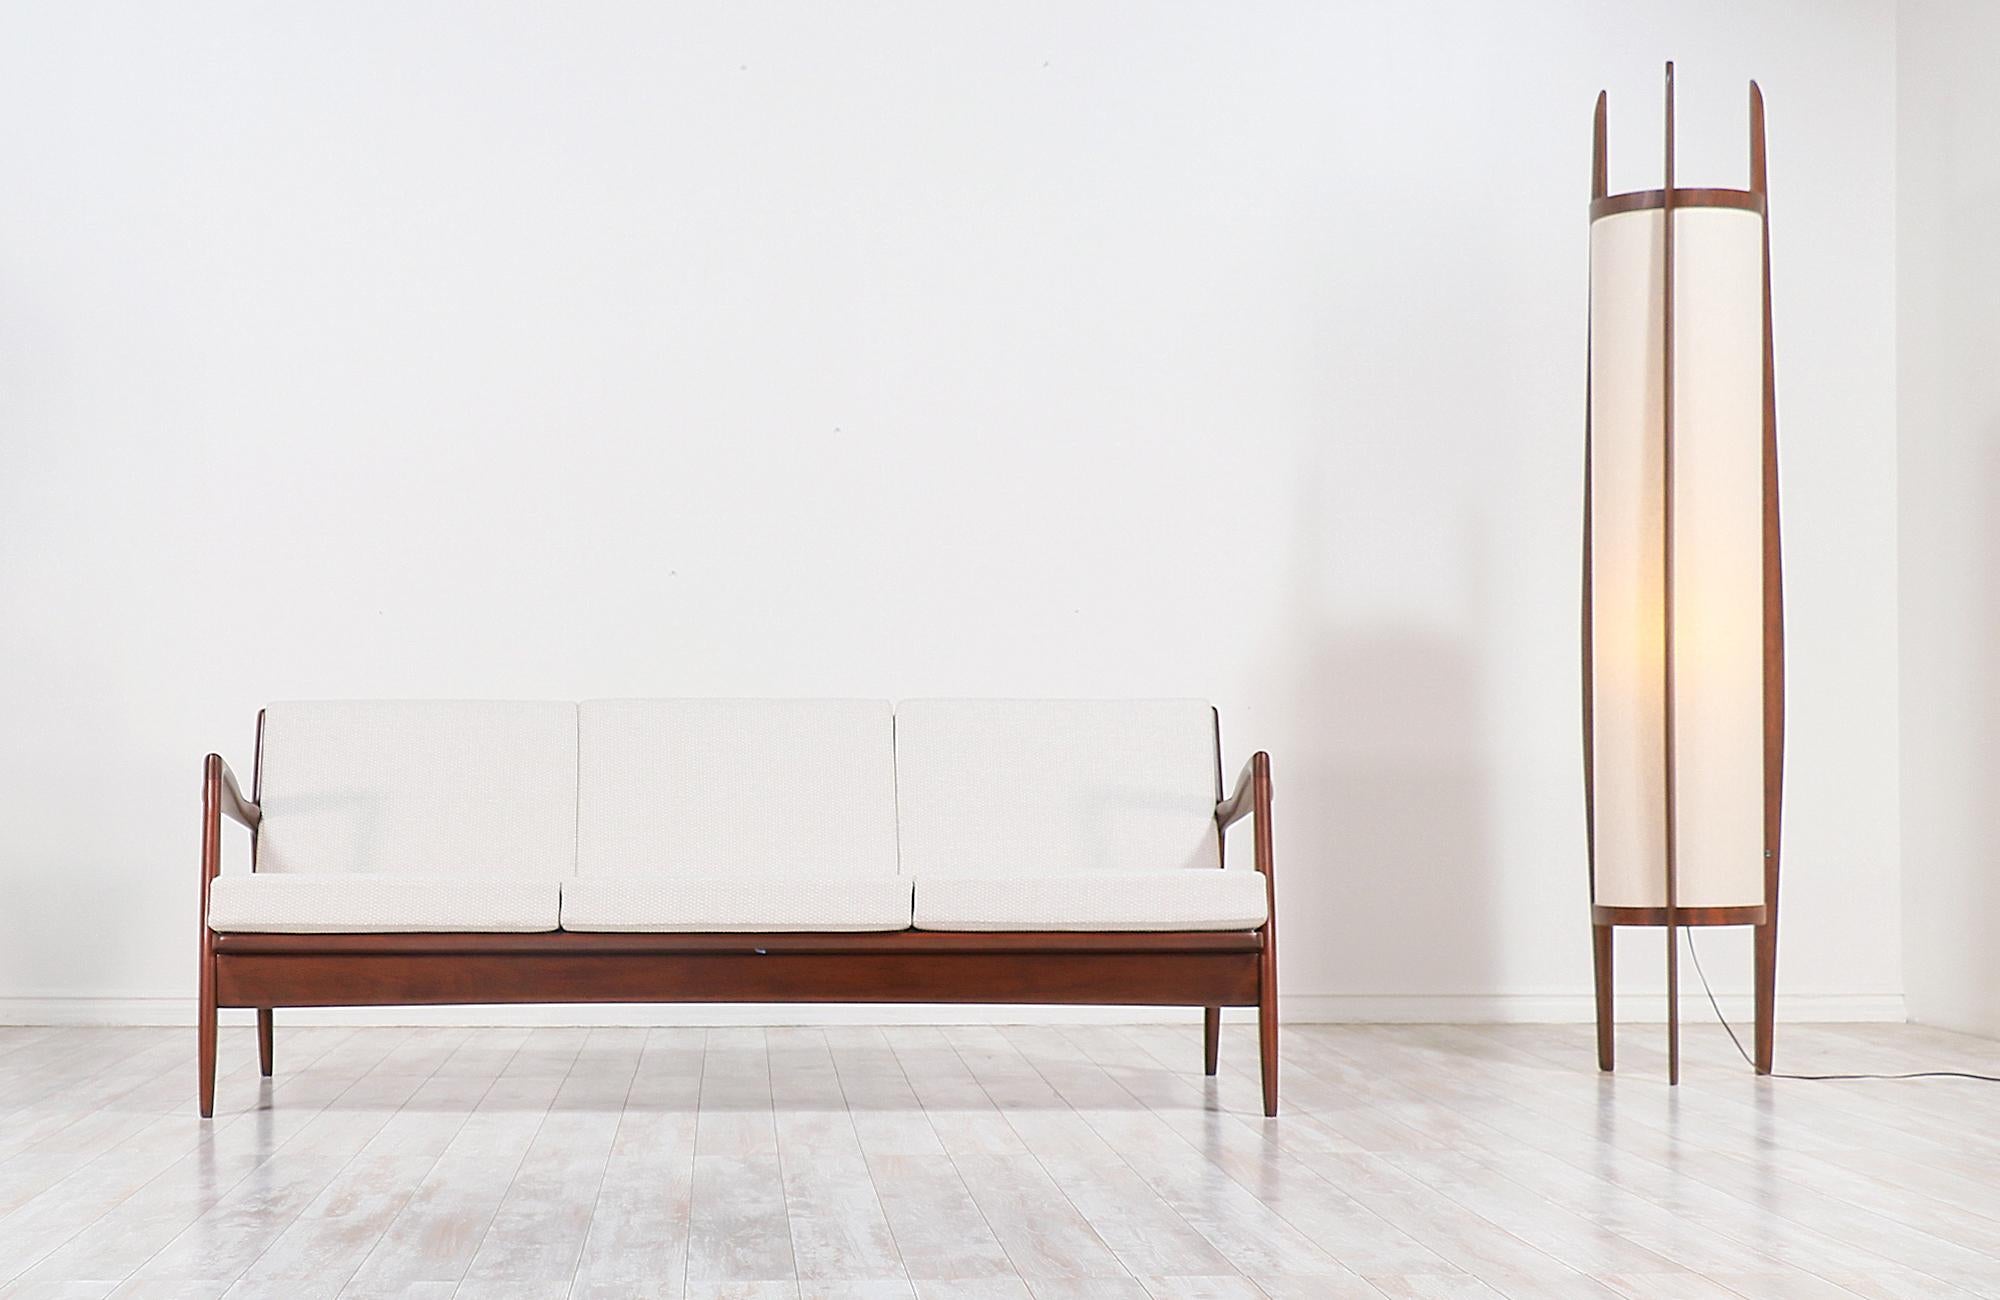 Stylish modern sofa designed by Danish architect and furniture designer Ib-Kofod Larsen for Selig in Denmark circa 1960s. This elegant sofa features a solid sculpted walnut-stained Beechwood frame with vertical slats at the back to create a sleek